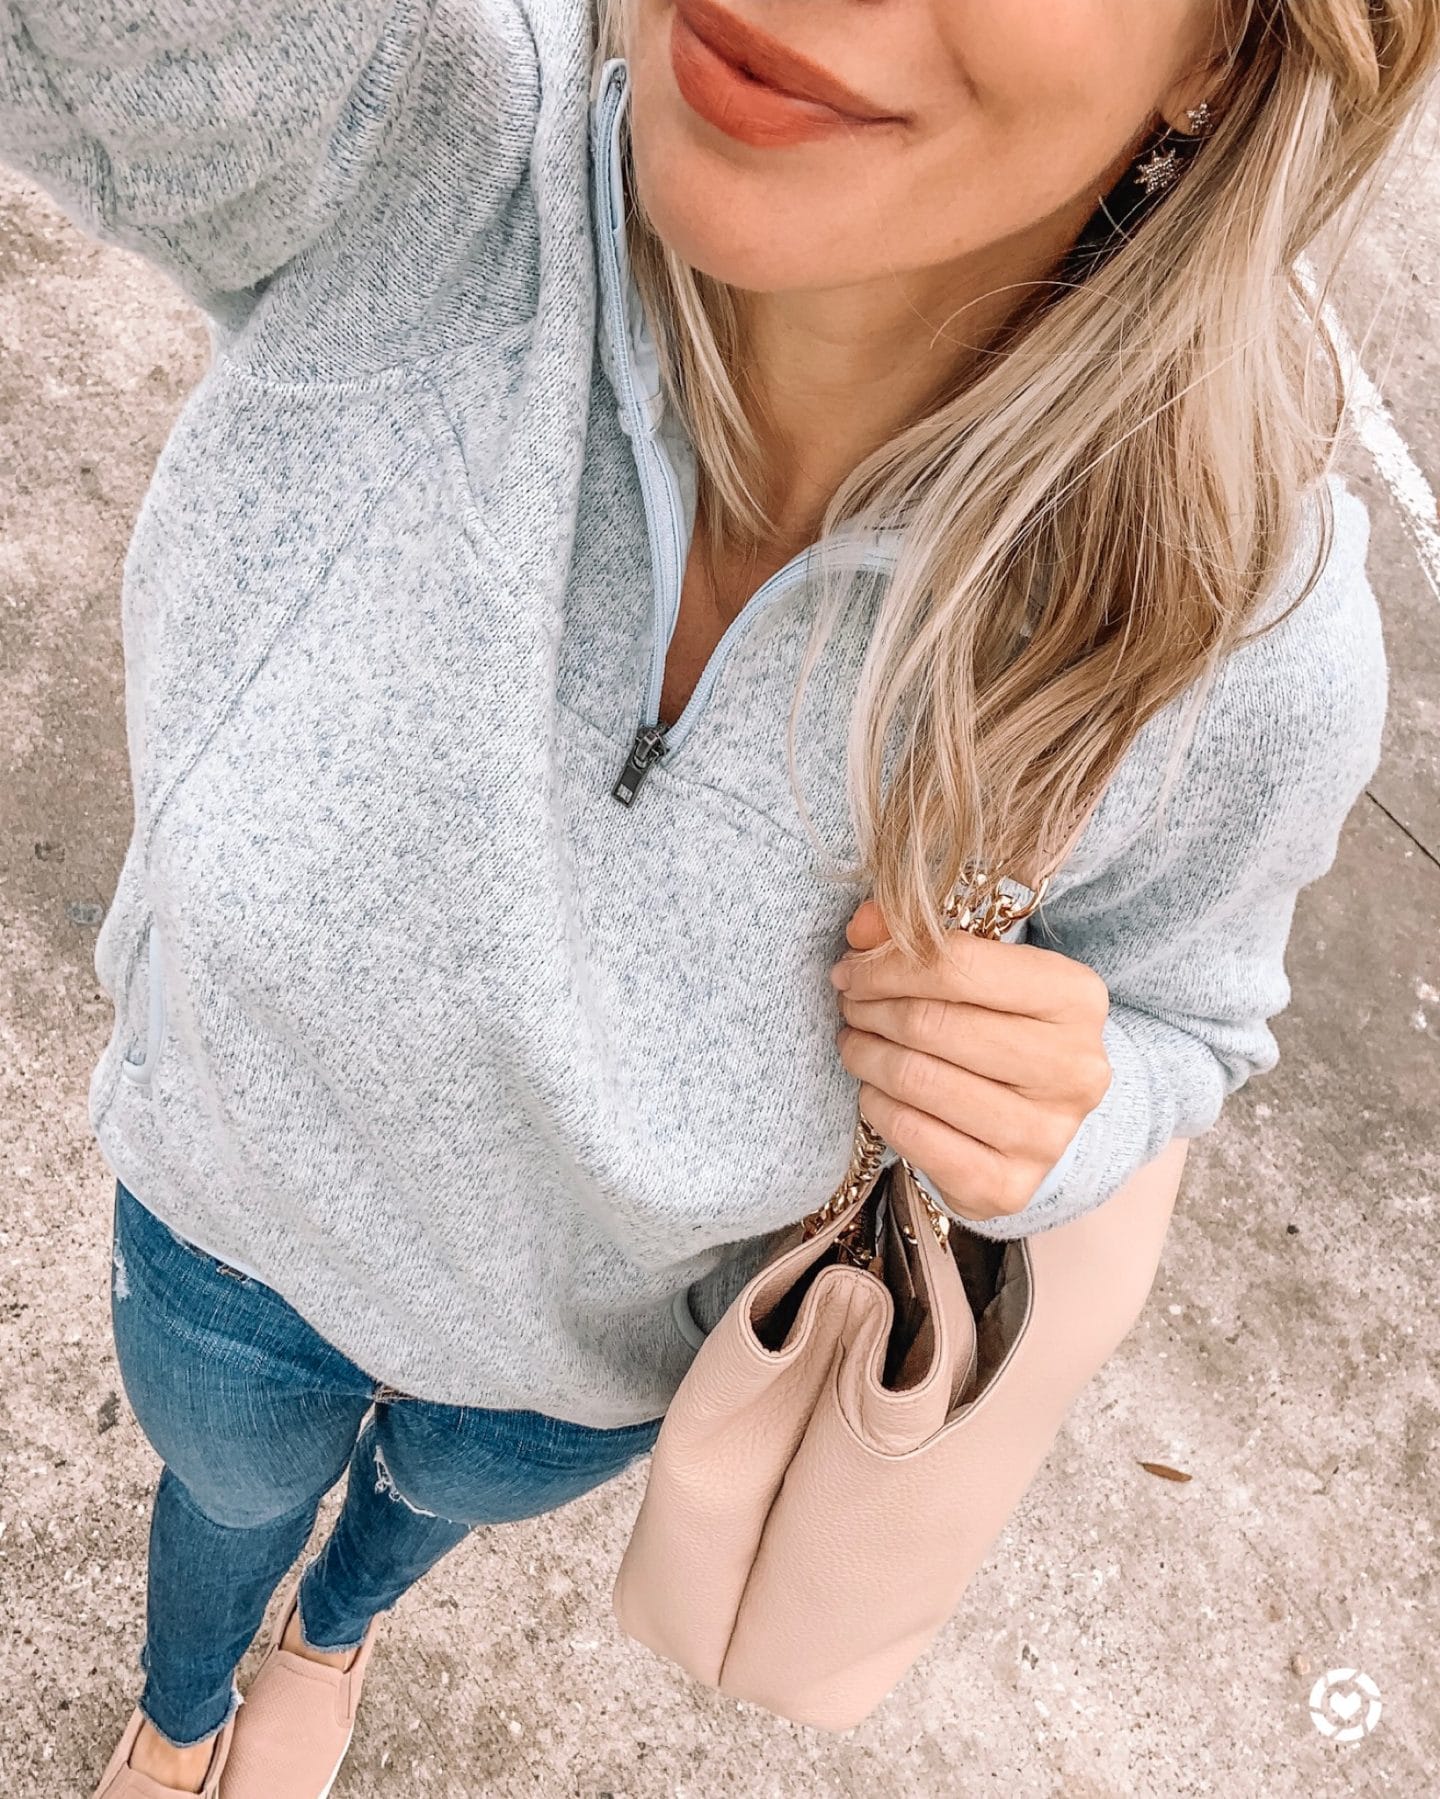 Zip pullover and jeans